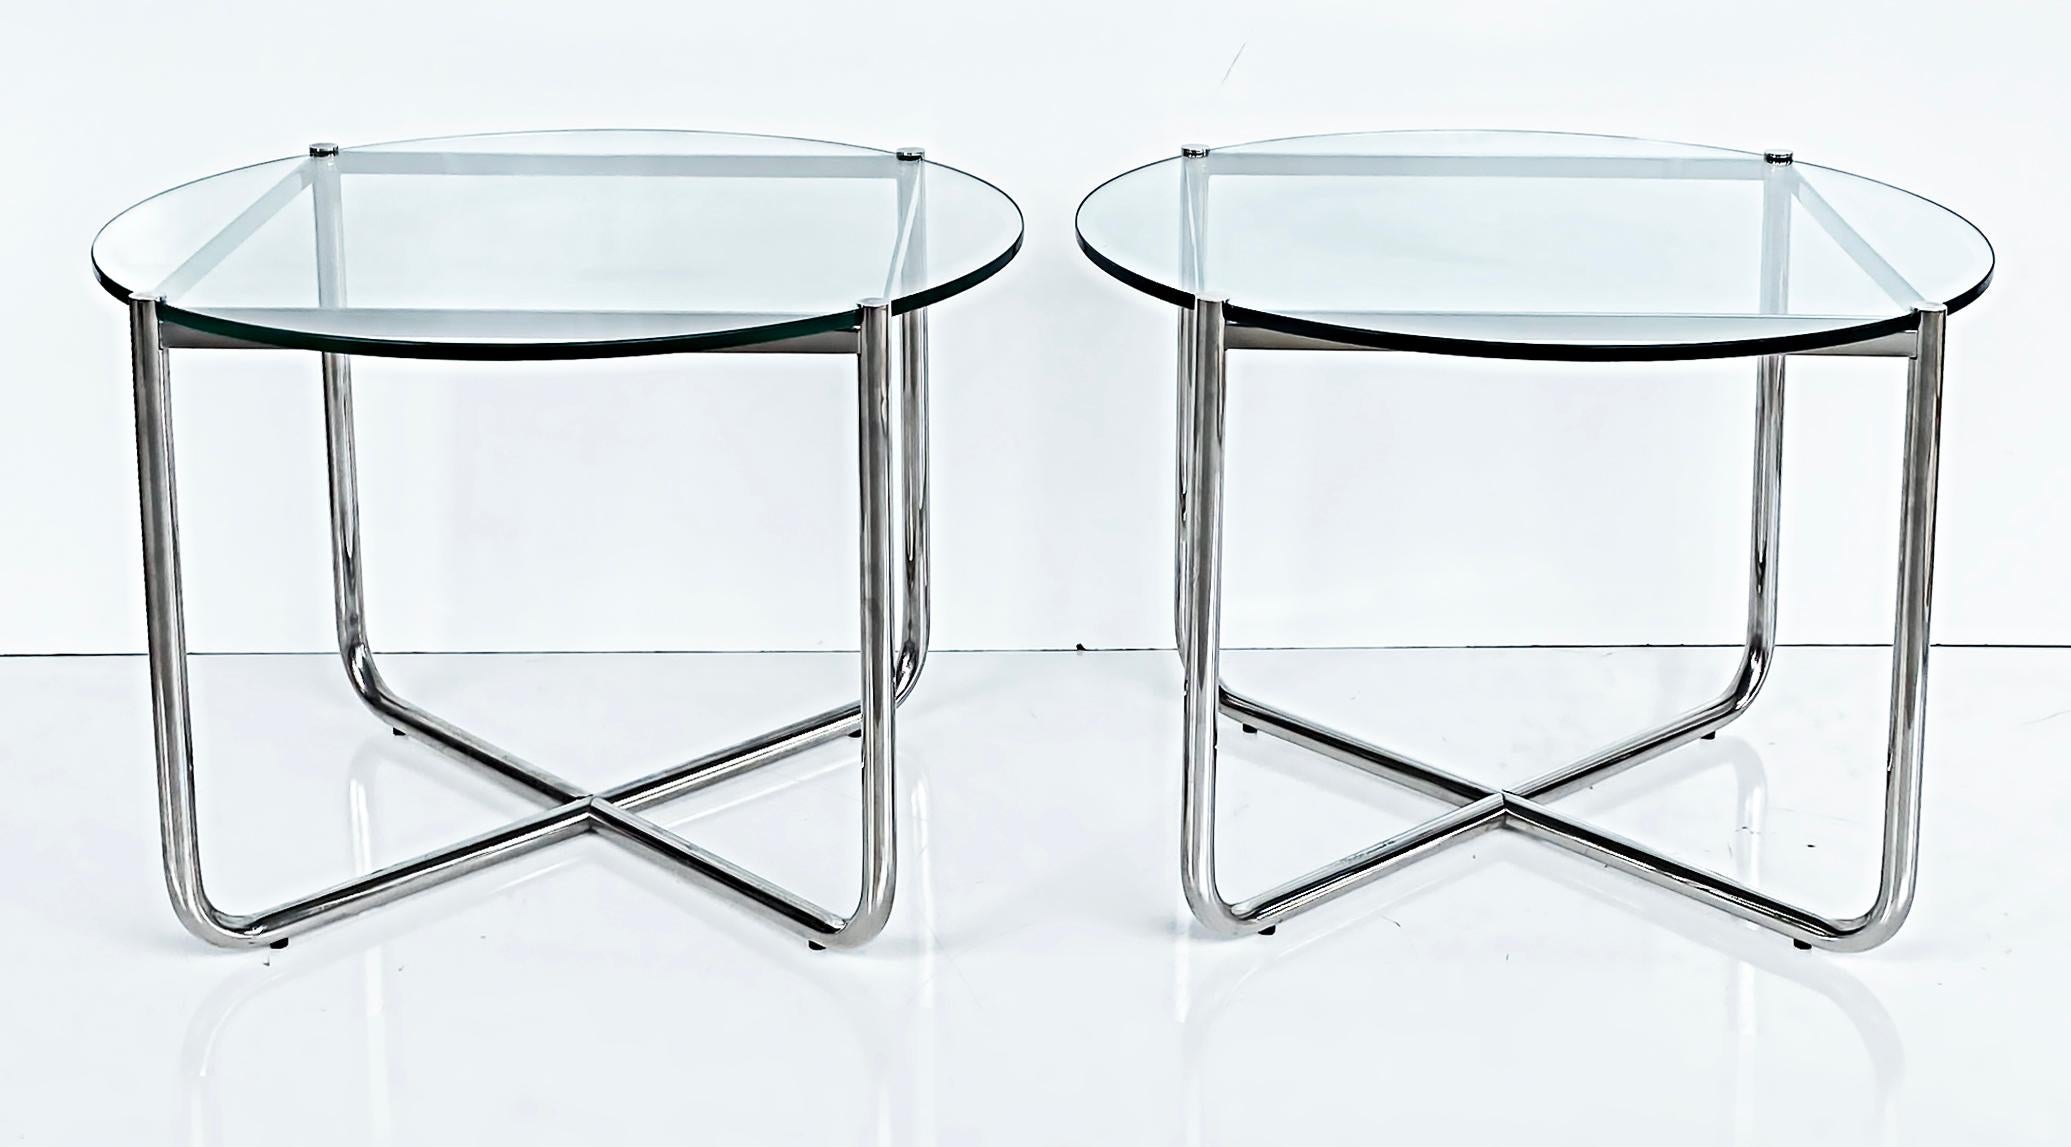 Knoll Studio Mies Van De Rohe MR Side Tables

Offered for sale is a pair of Knoll Studio Ludwig Mies Van Der Rohe MR stainless steel side tables with glass tops. Each Top is ½” thick clear polished plate glass and the frame and legs are tubular